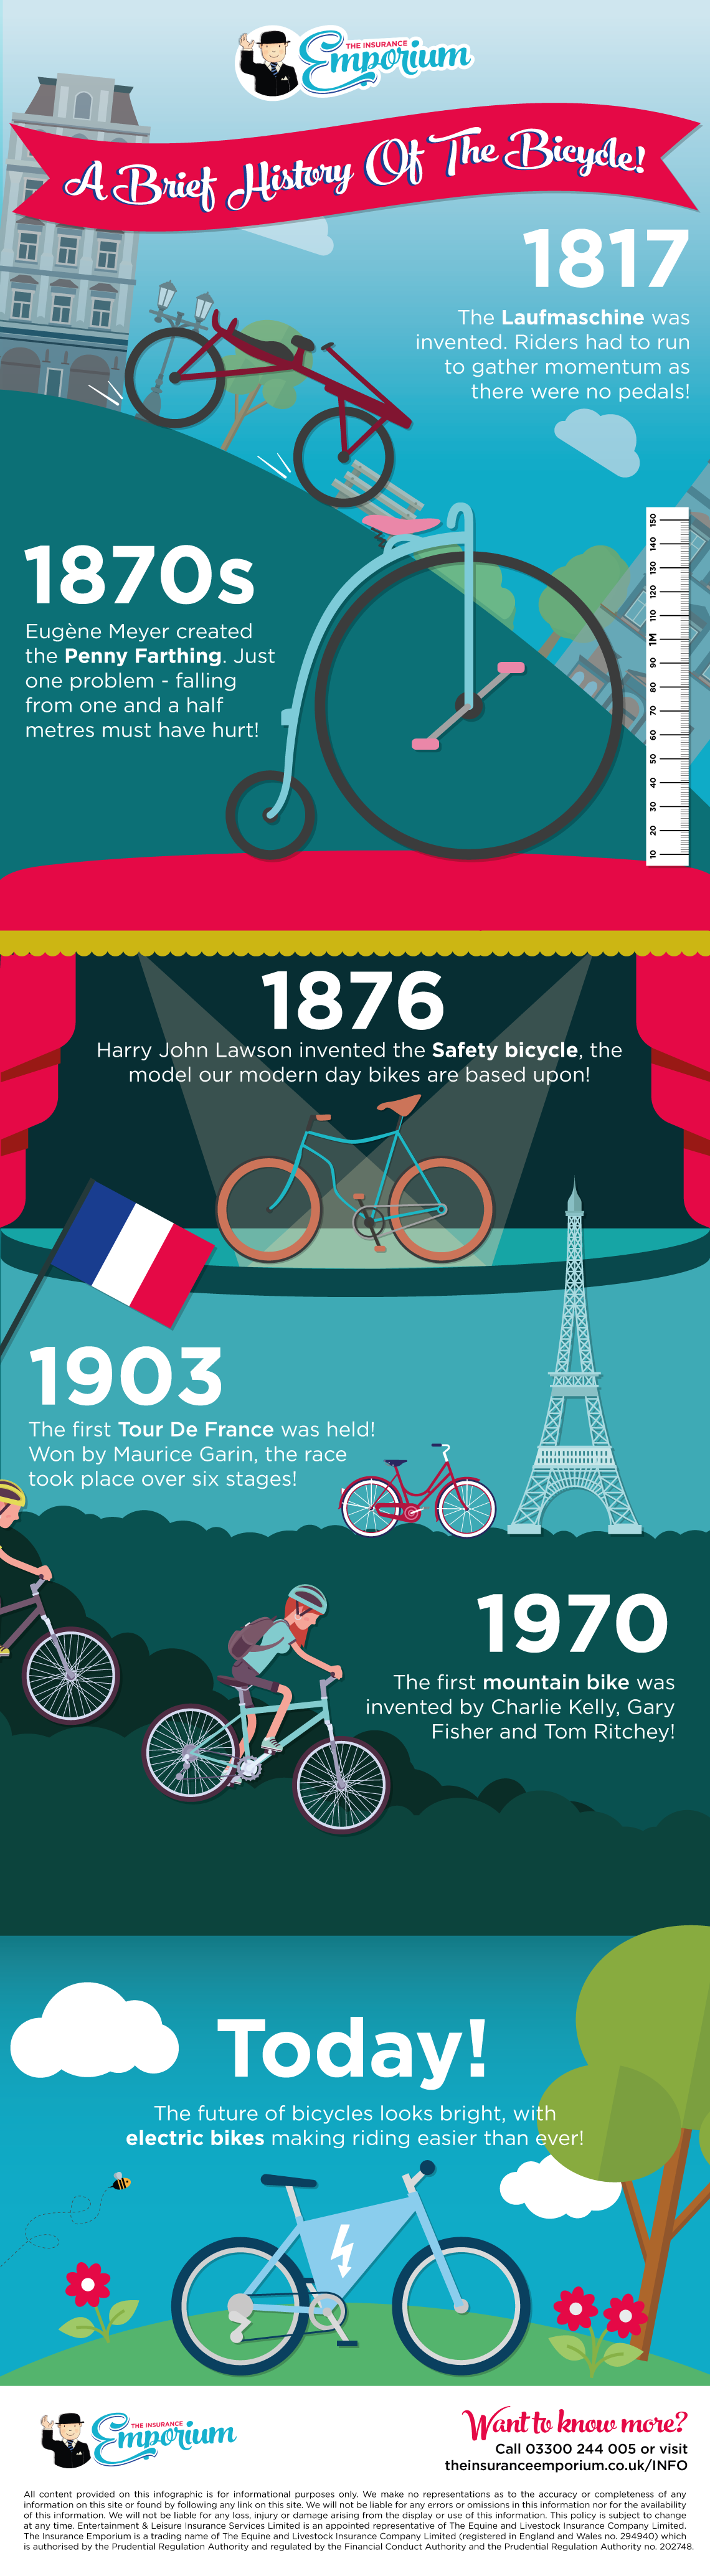 A Brief History of the Bicycle Infographic